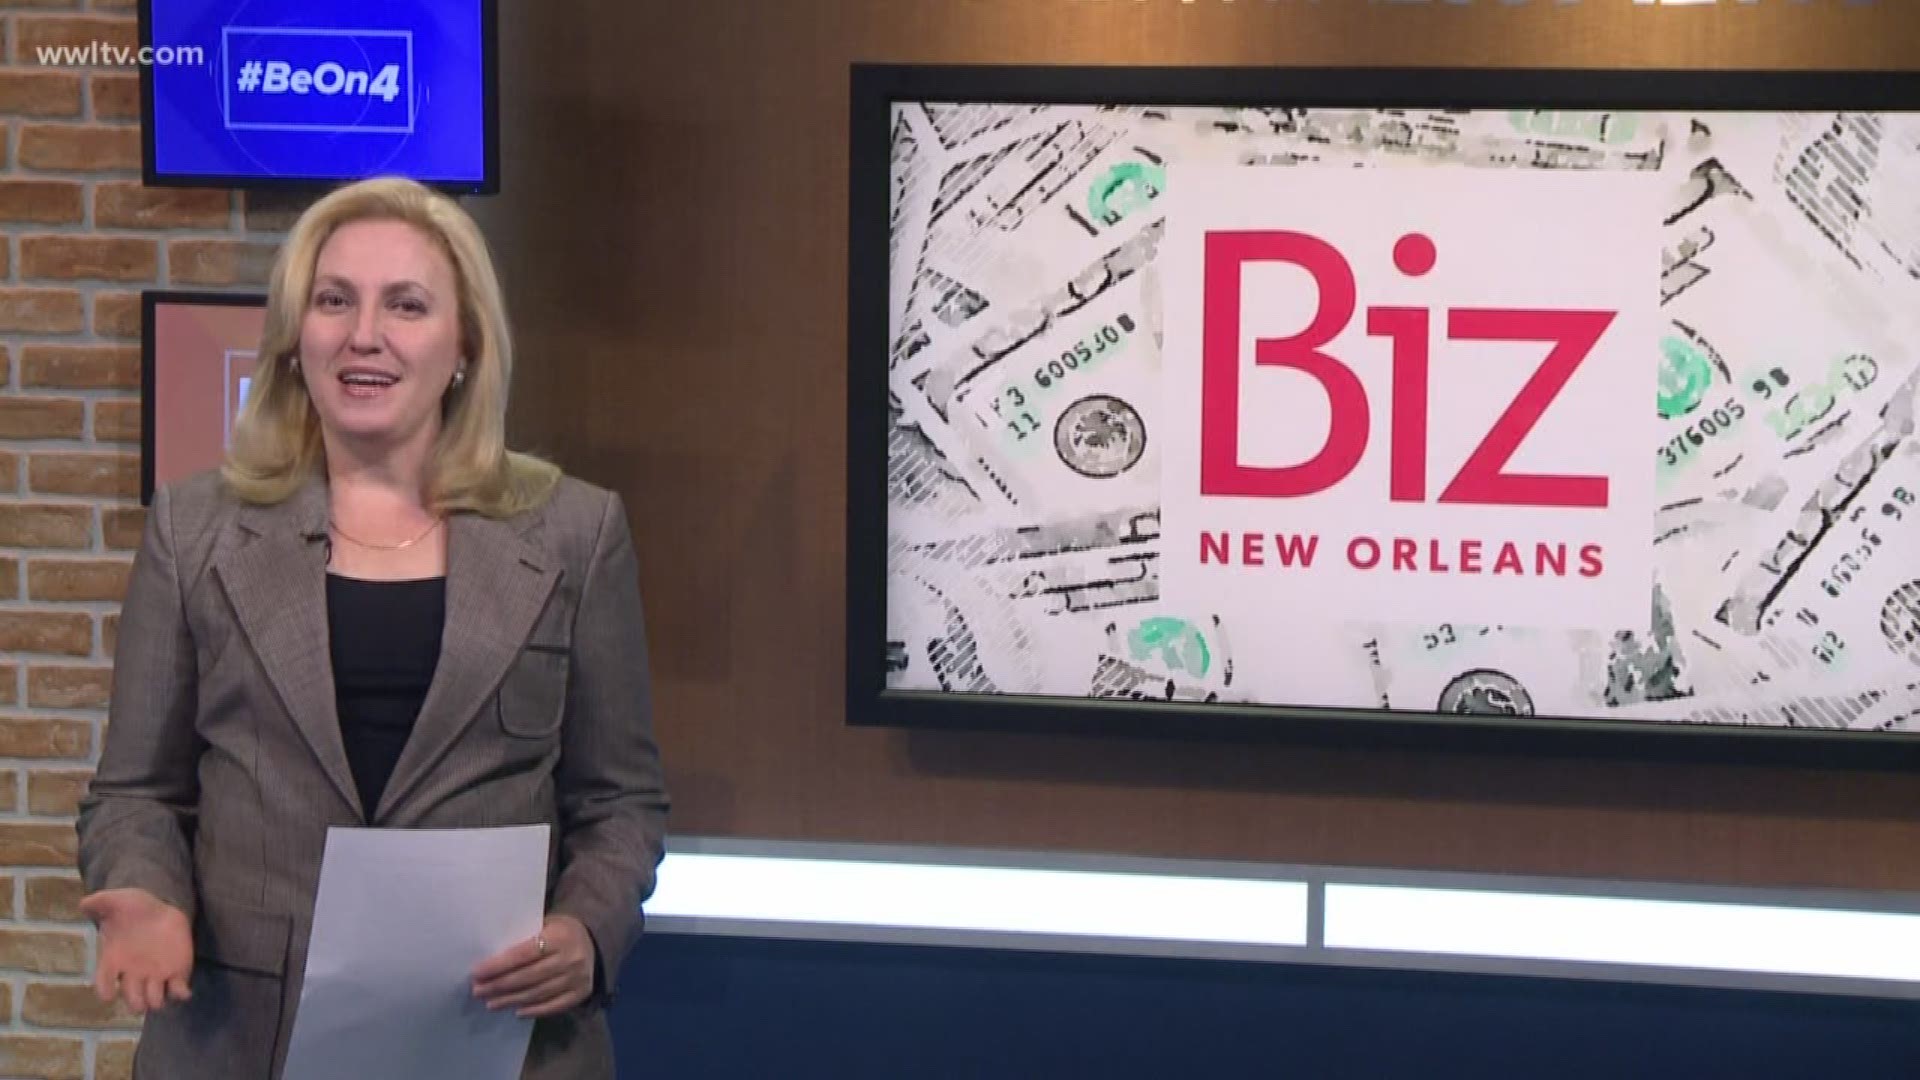 It seems that nowadays many people juggle multiple jobs. BizNewOrleans.com's Leslie Snadowsky says a business credit card can help keep track of your new enterprise and maximize your income.